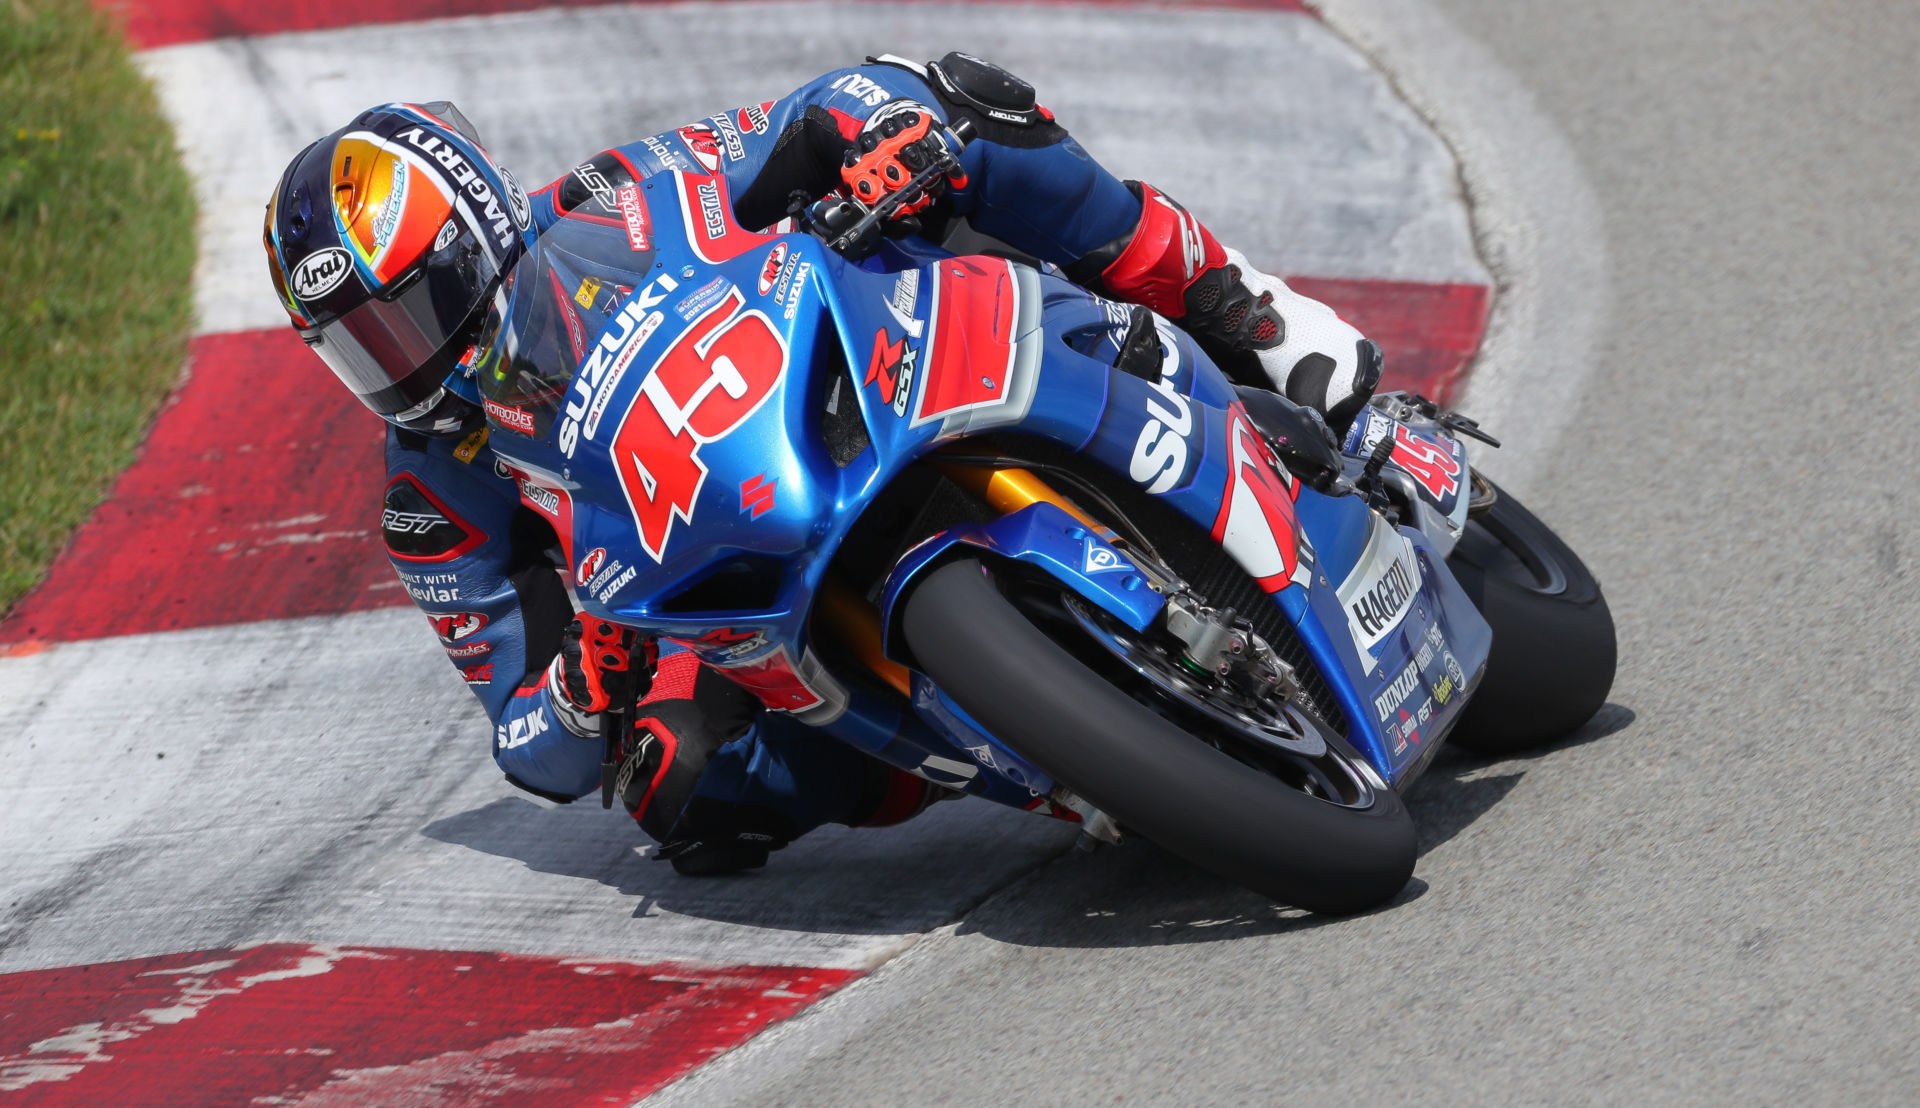 Cam Petersen (45) had another solid weekend with two top-ten finishes on his GSX-R1000R. Photo by Brian J. Nelson, courtesy Suzuki Motor USA, LLC.